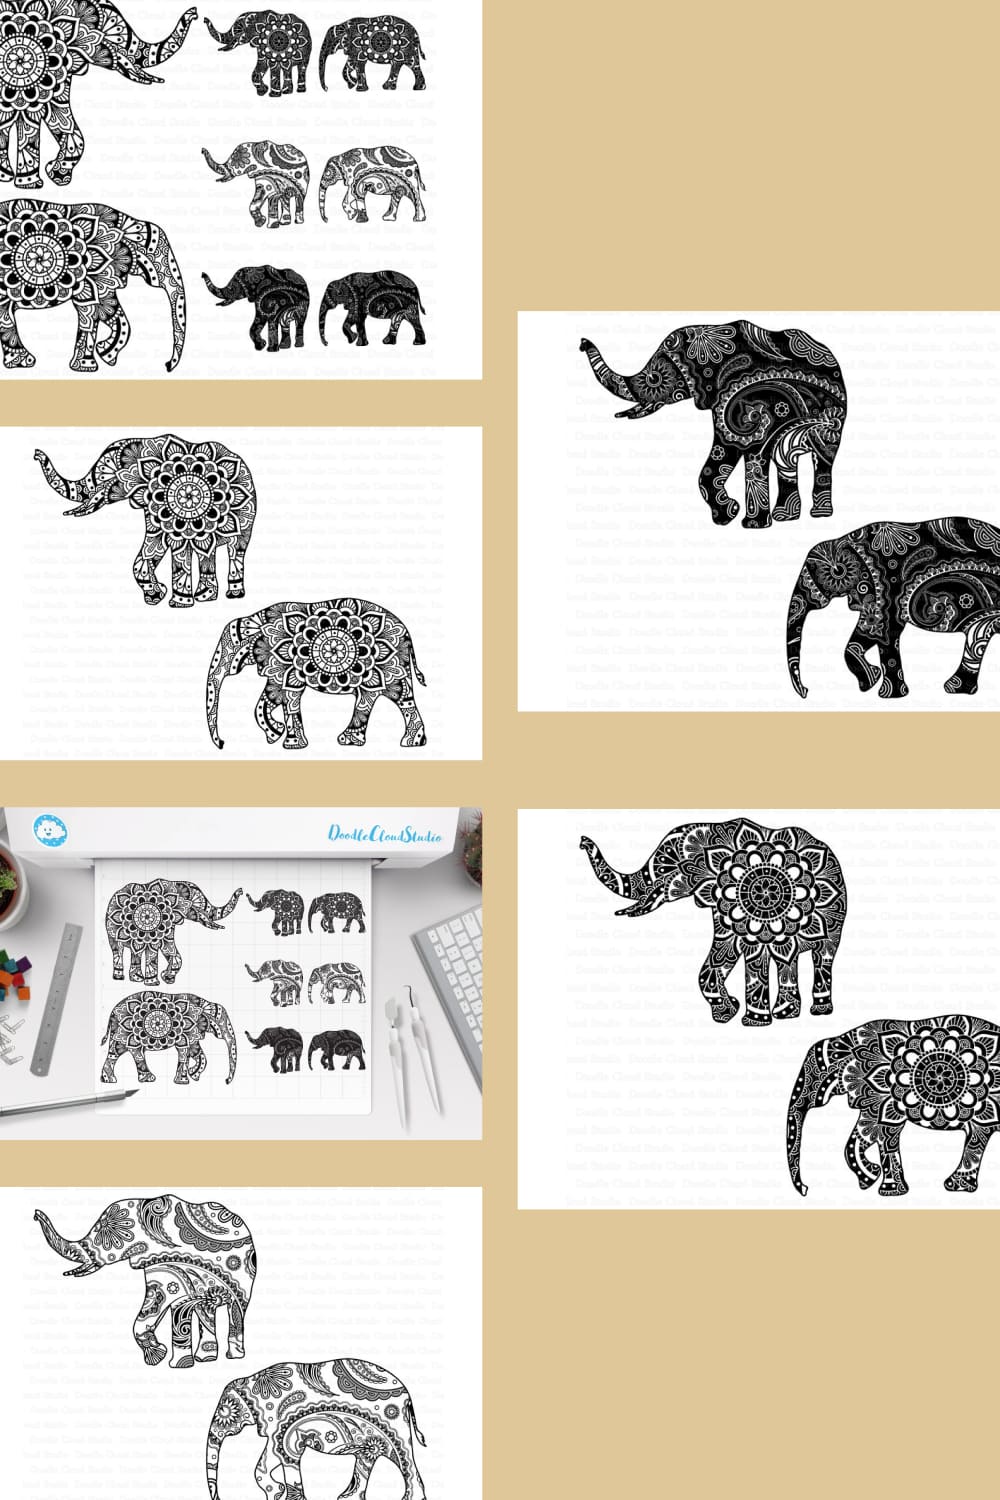 Group of elephants that are drawn in black and white.